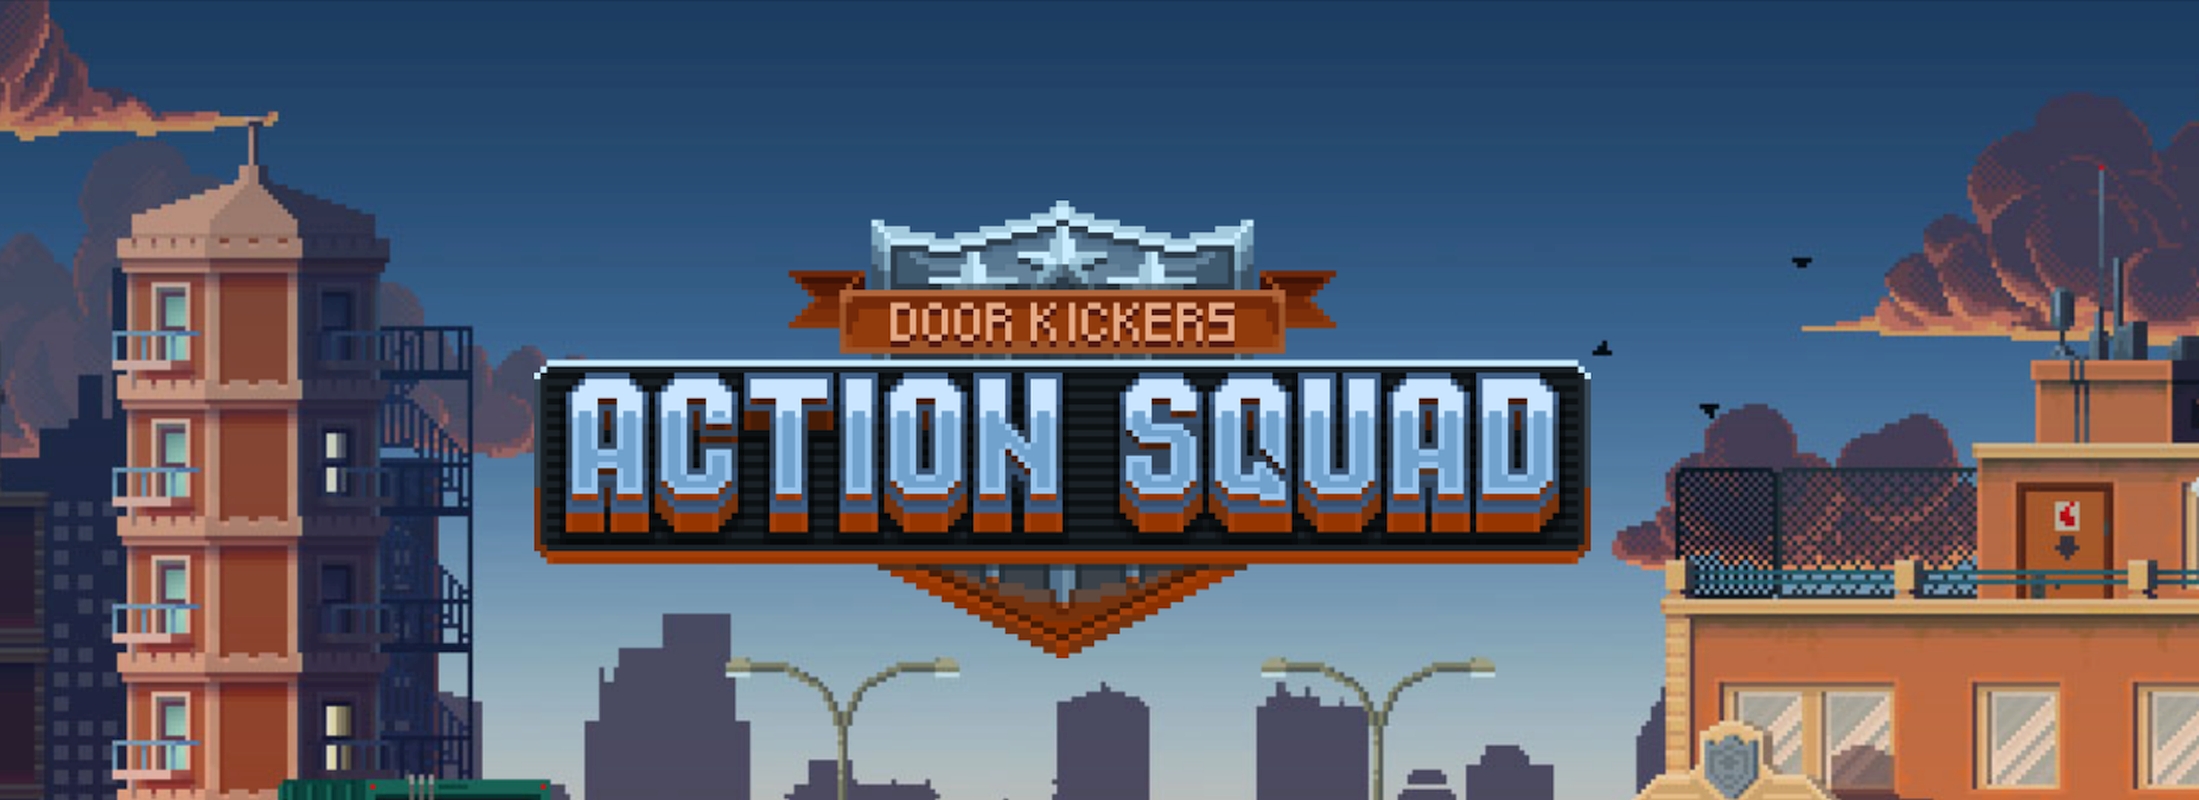 KillHouse Games’ Door Kickers: Action Squad Now Available For Pre-Registration On Mobile